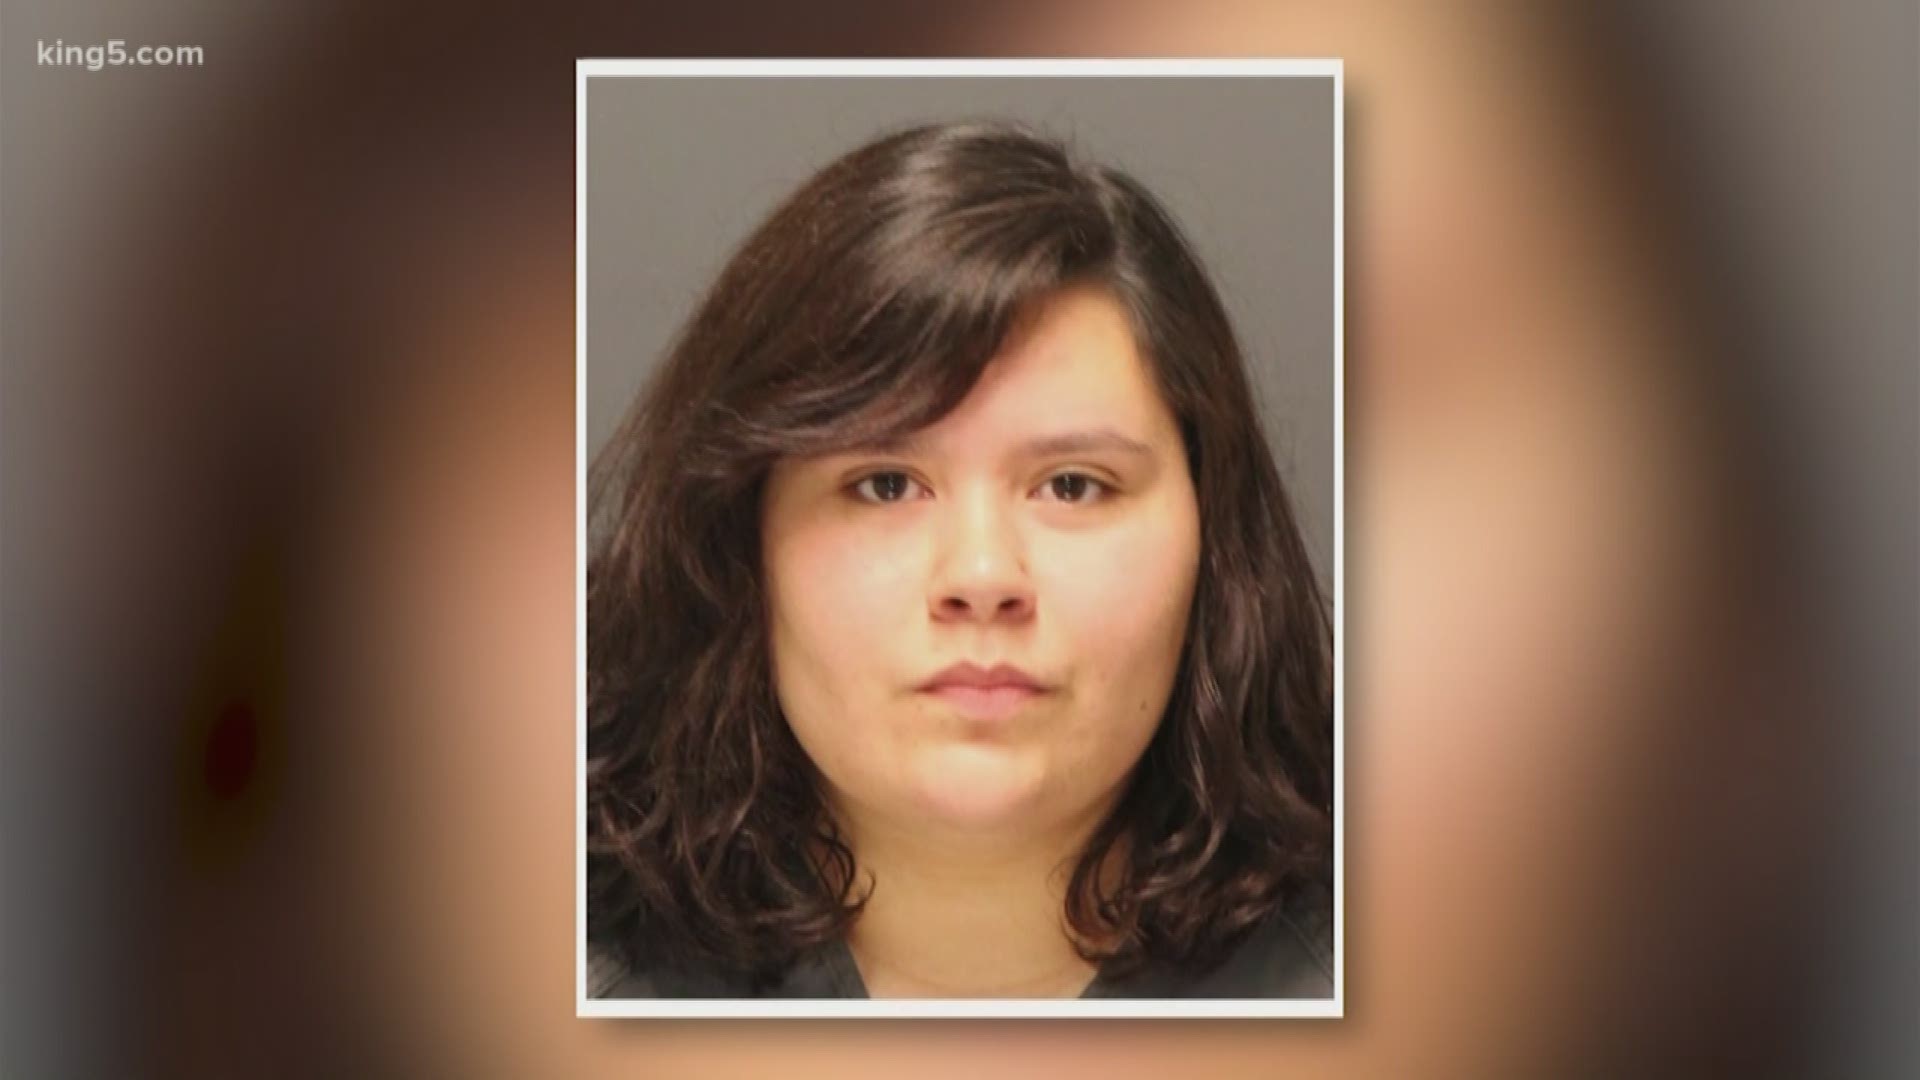 An 18-year-old babysitter in Pierce County tonight faces multiple counts of possessing child pornography. She advertised her babysitting services on a popular website, and investigators are trying to find out if she harmed any children in her care. We want to warn you some of the details of this story are disturbing. KING 5's Ted Land has more from Tacoma.